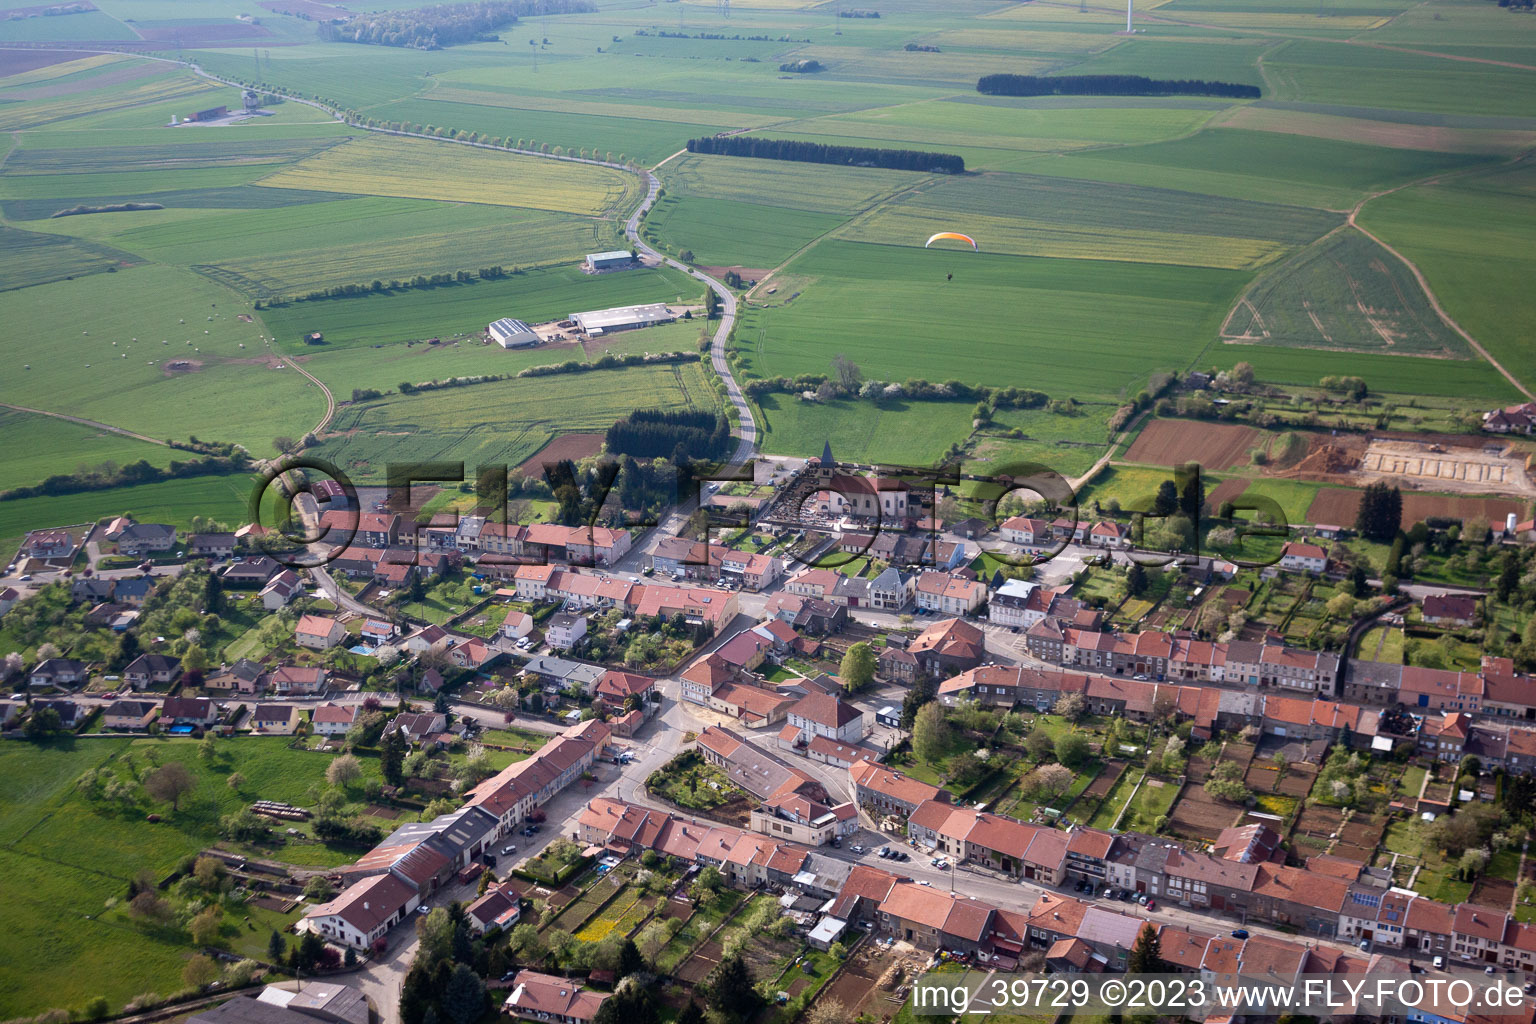 Villers-la-Montagne in the state Meurthe et Moselle, France from above